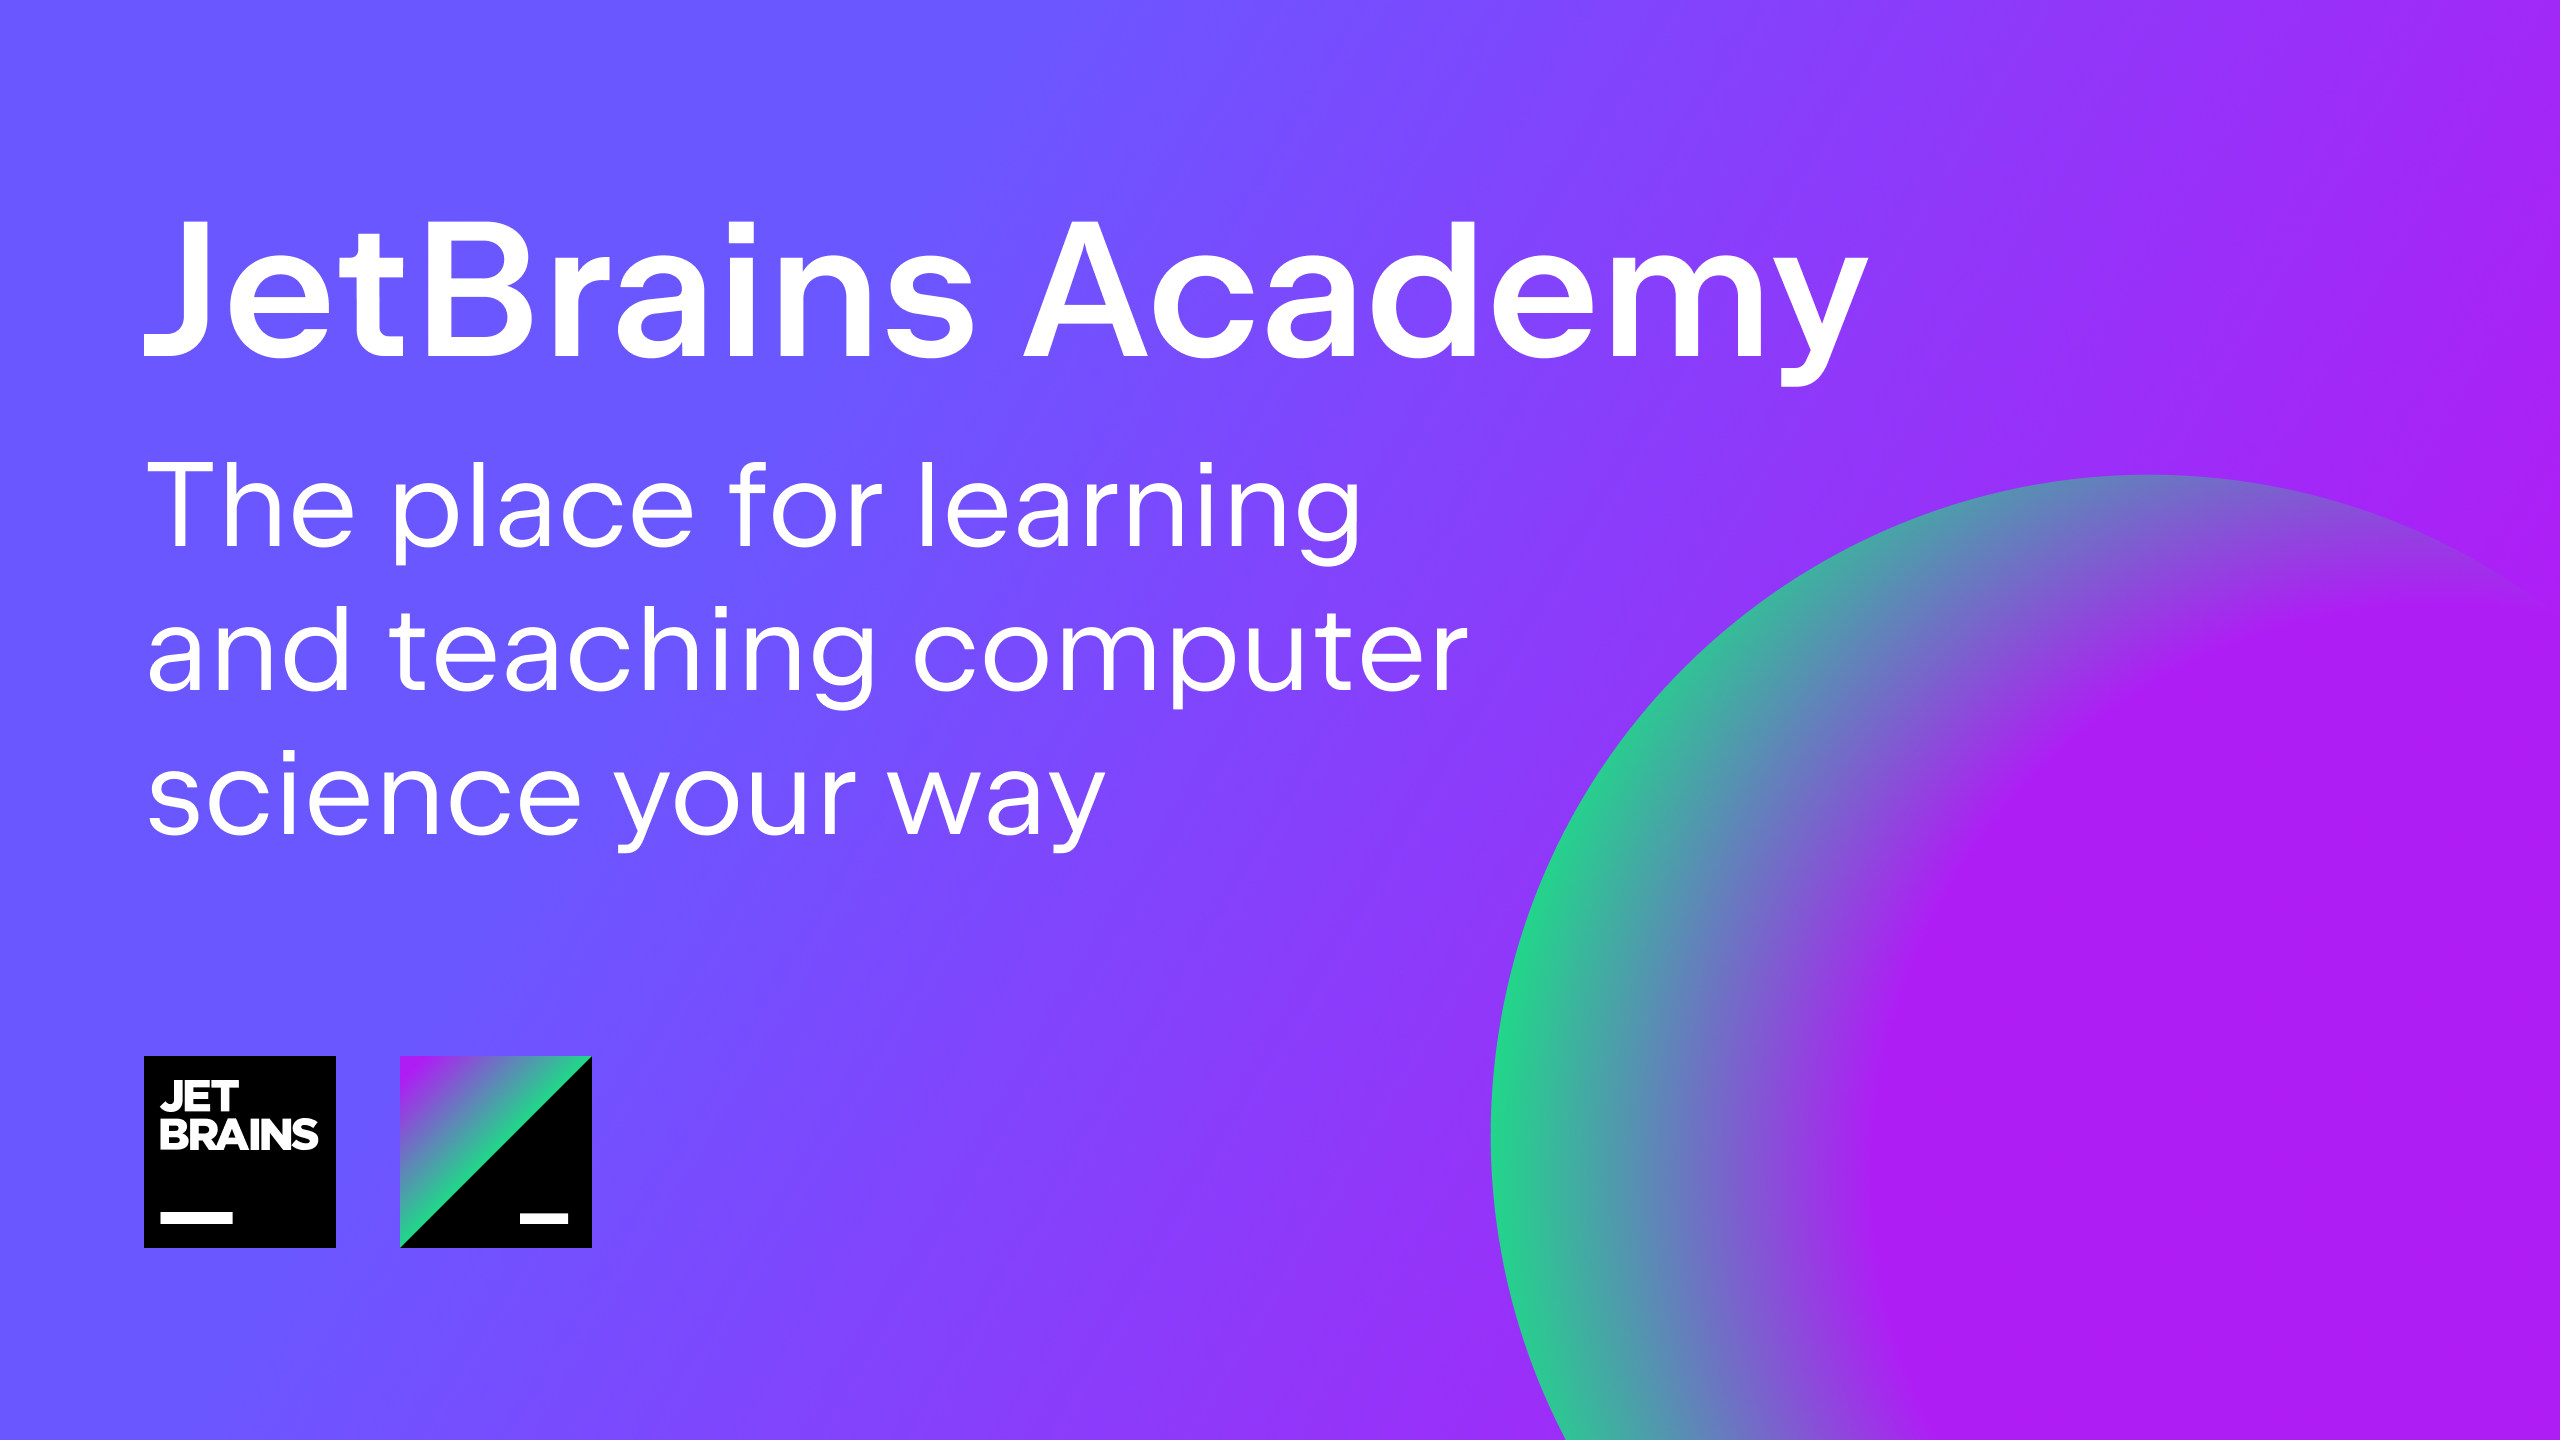 JetBrains Academy: A hands-on platform for learning to program